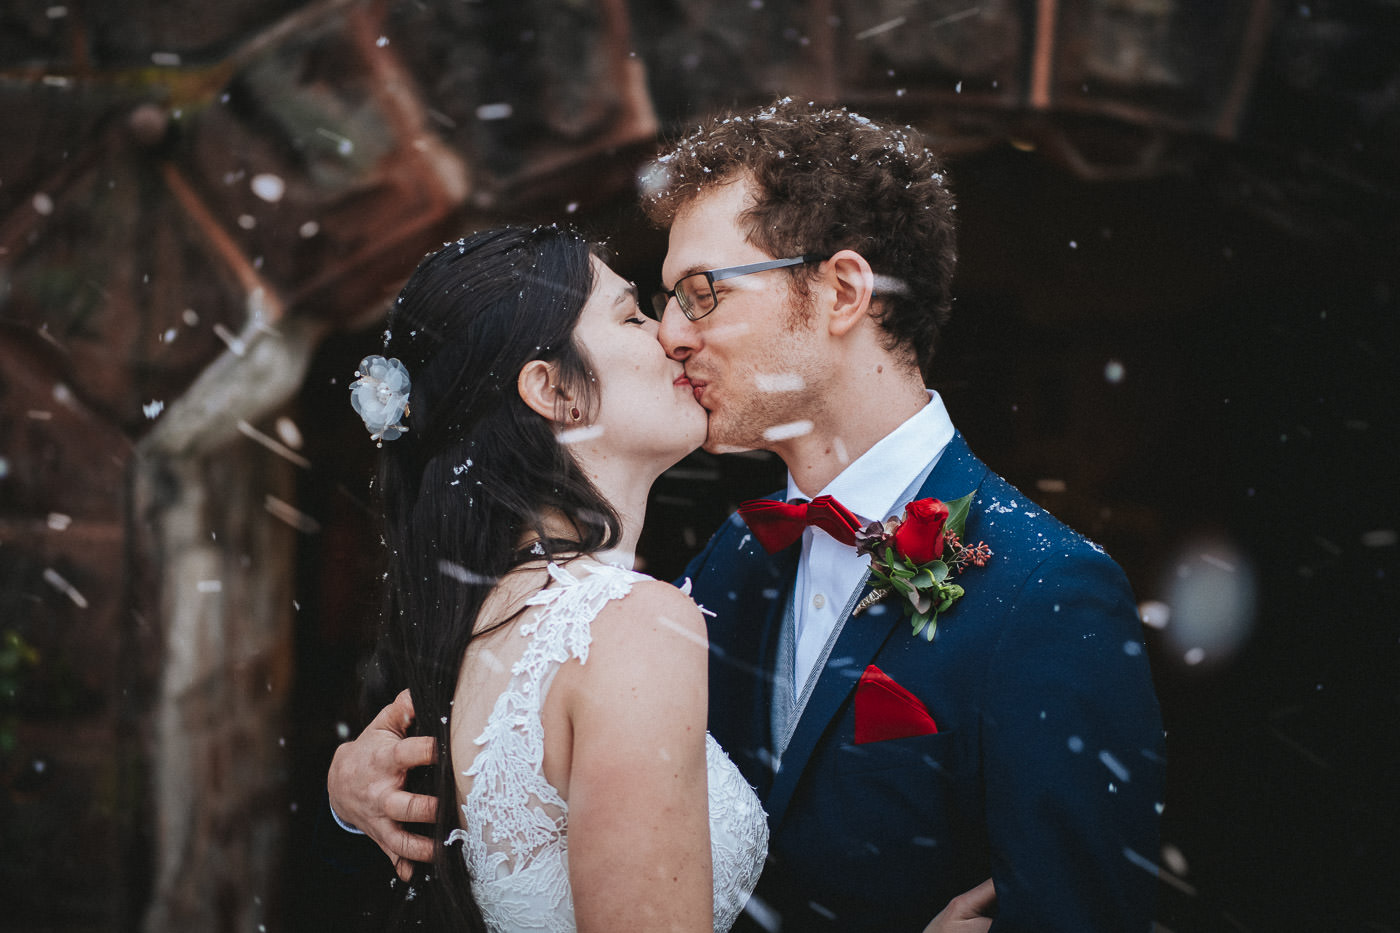 Kissing bridal couple at the first look in the snow in front of Saareck Castle in Mettlach, winter wedding in Saarland - wedding photographer Germany, Brautrausch